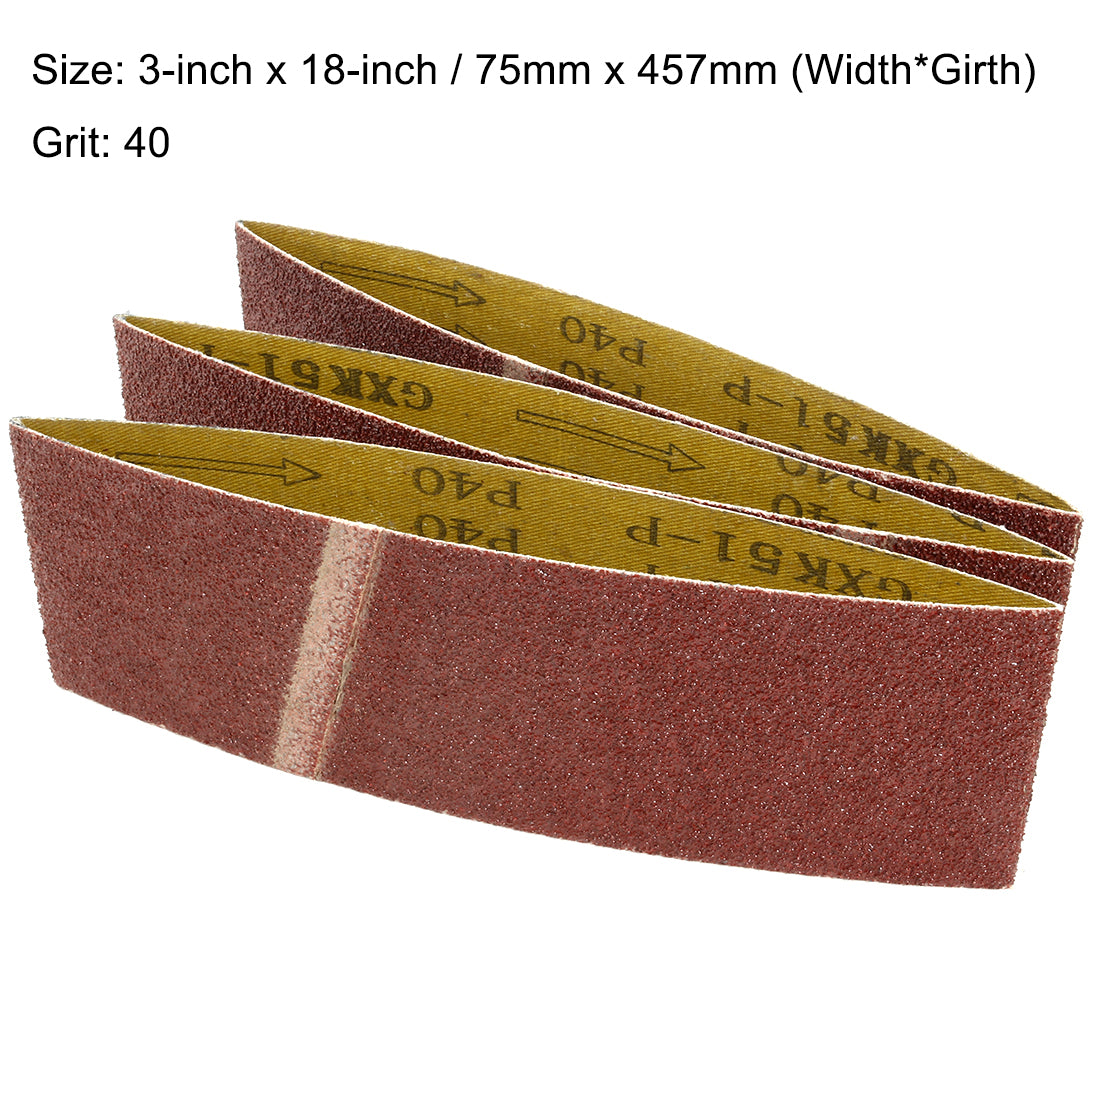 uxcell Uxcell 3-Inch x 18-Inch Aluminum Oxide Sanding Belt 40 Grits Lapped Joint 3pcs